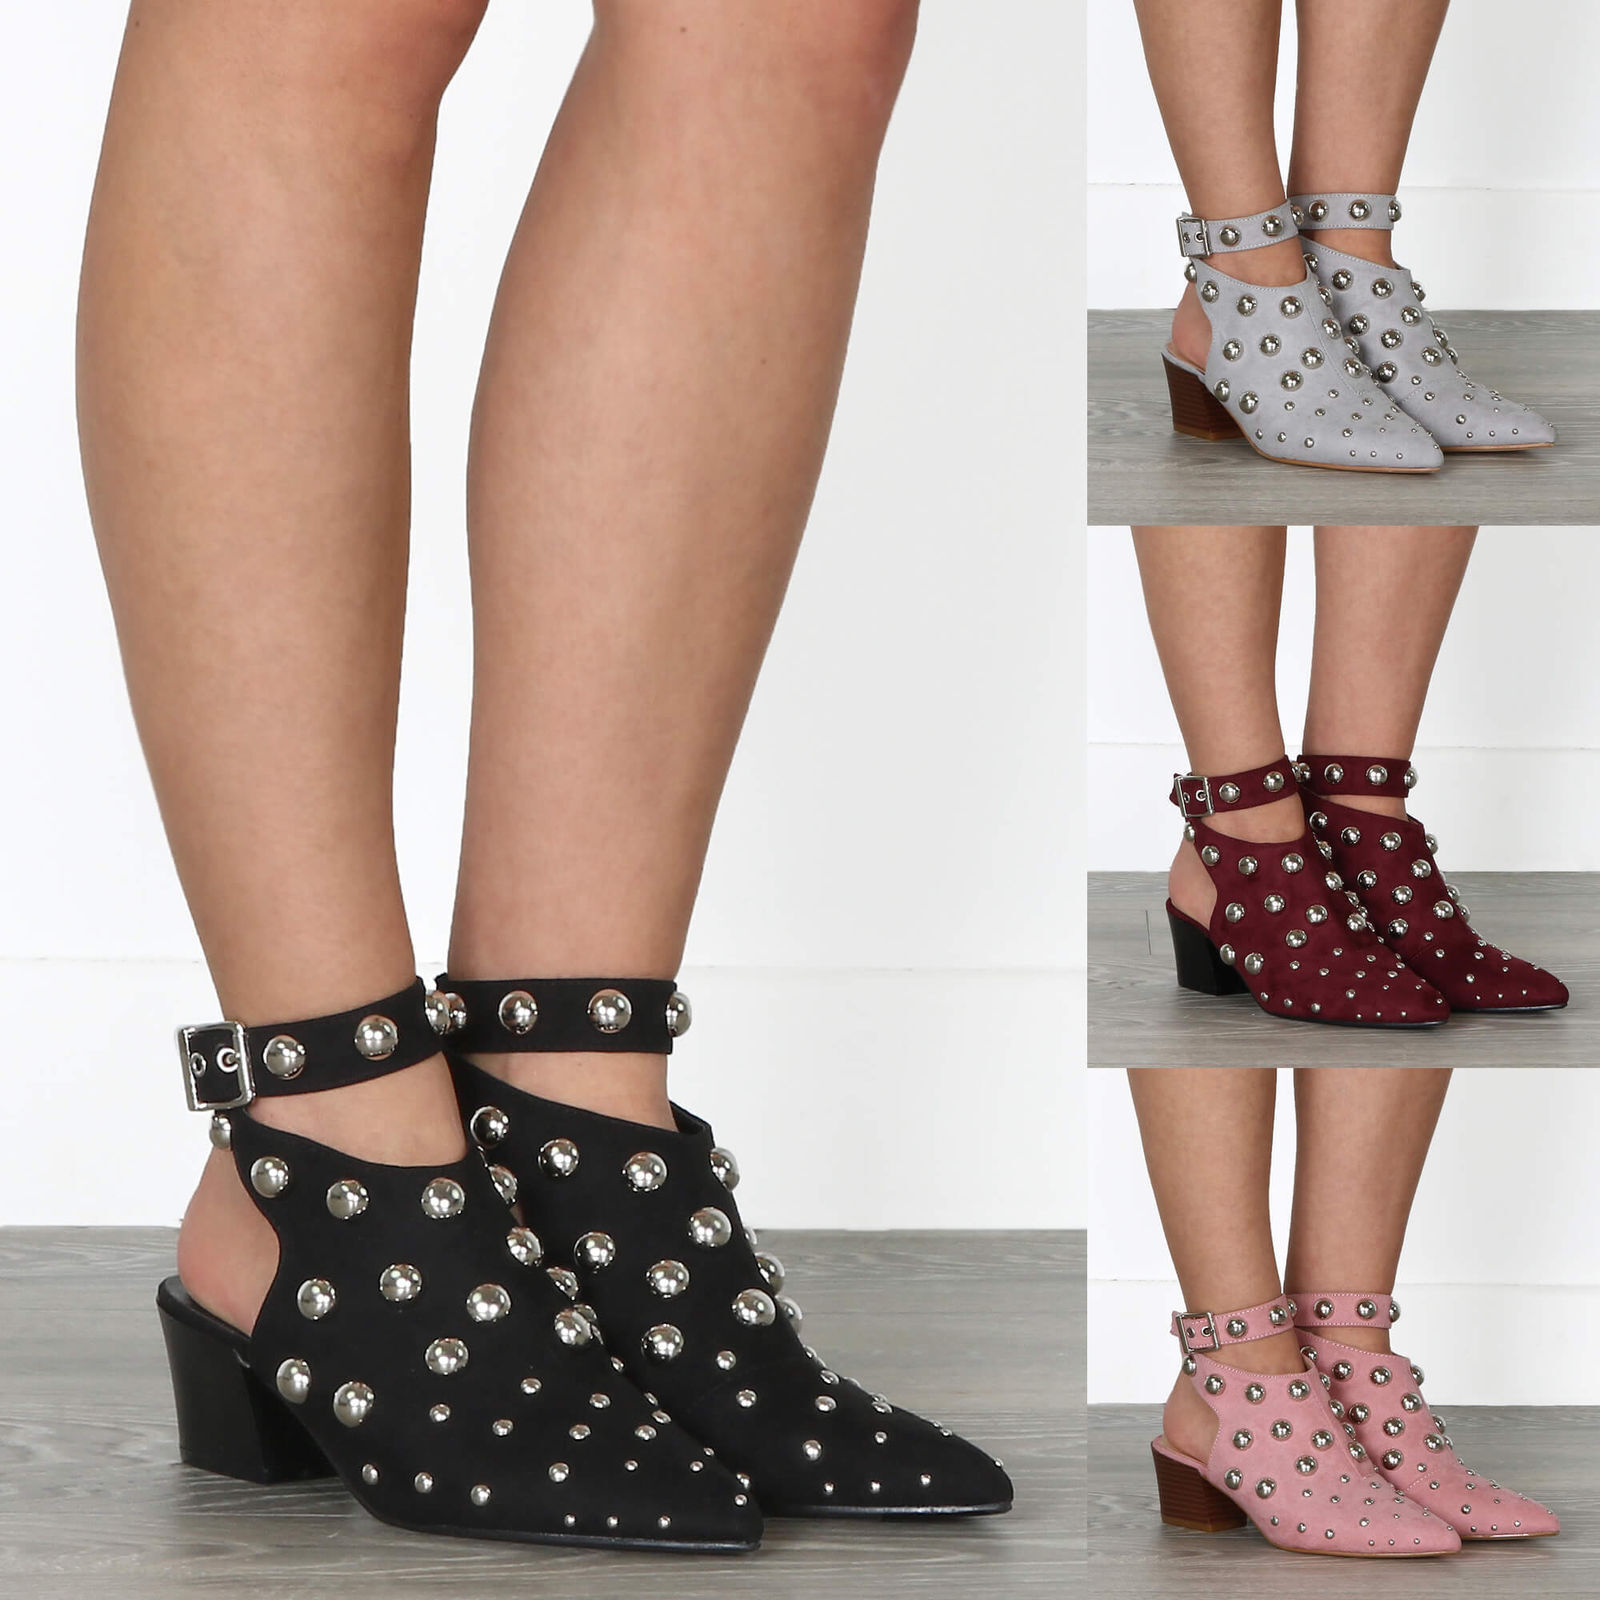 Elegant Mid Heel Court Shoes Bubble Studded for Sophisticated Style in 4 colors